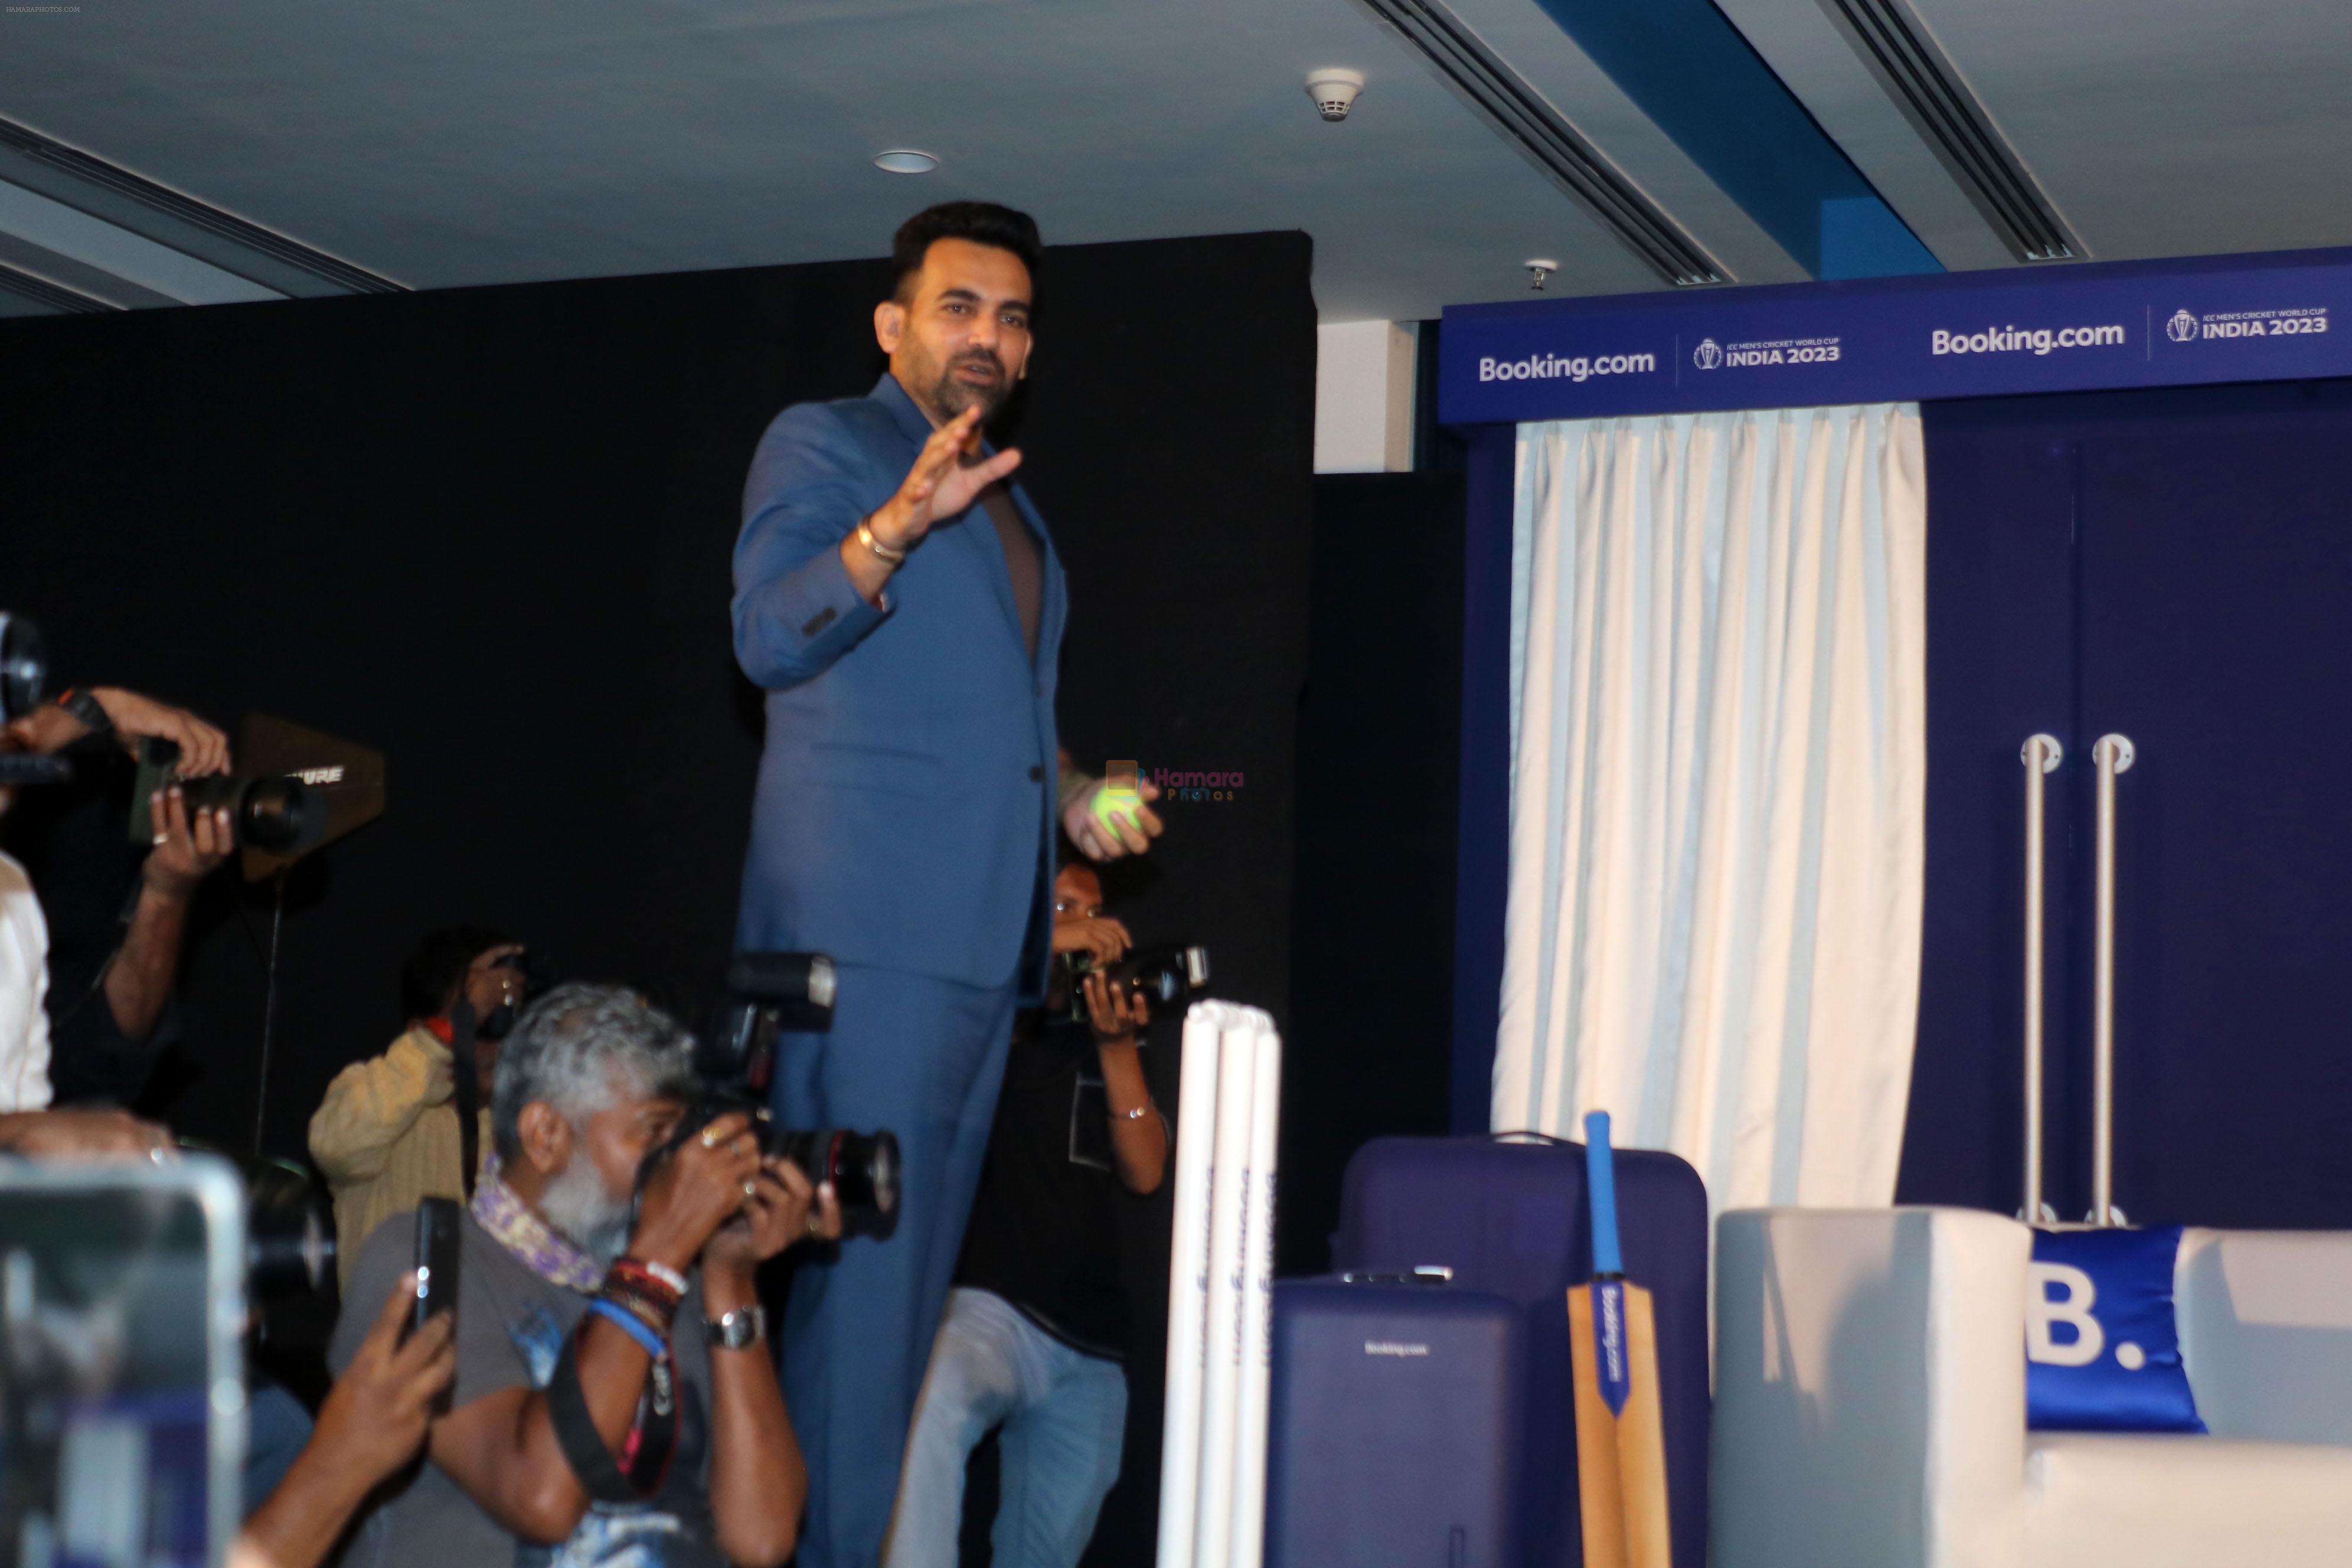 Zaheer Khan at booking.com being official accomodation partner for the ICC Men World Cup 2023 on 3rd Oct 2023